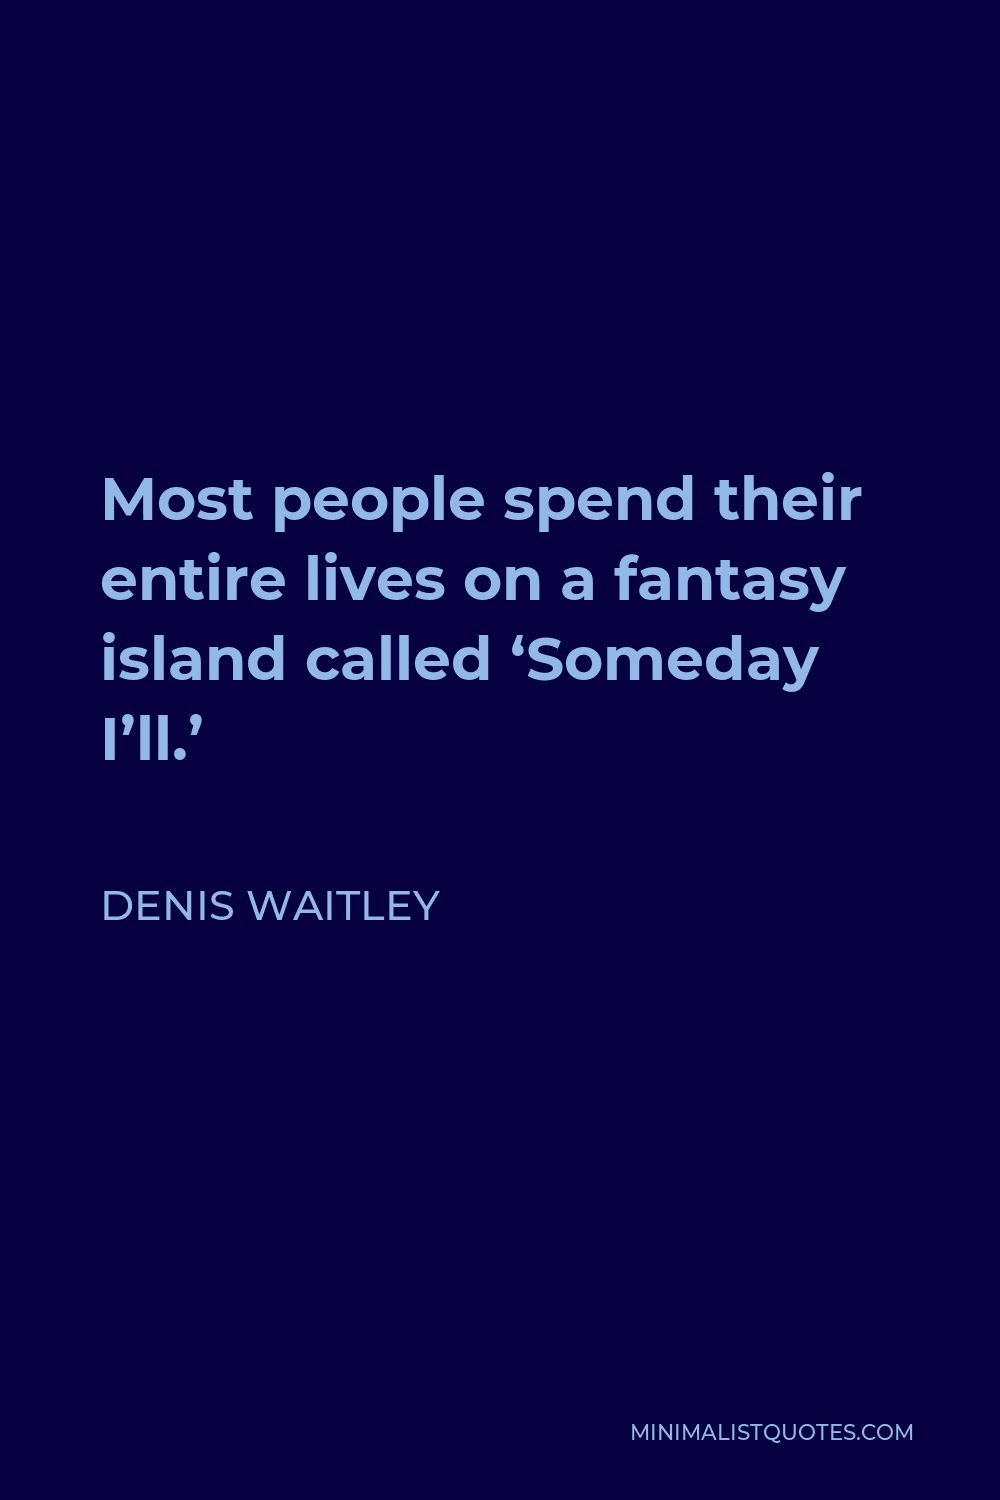 Denis Waitley Quote - Most people spend their entire lives on a fantasy island called ‘Someday I’ll.’